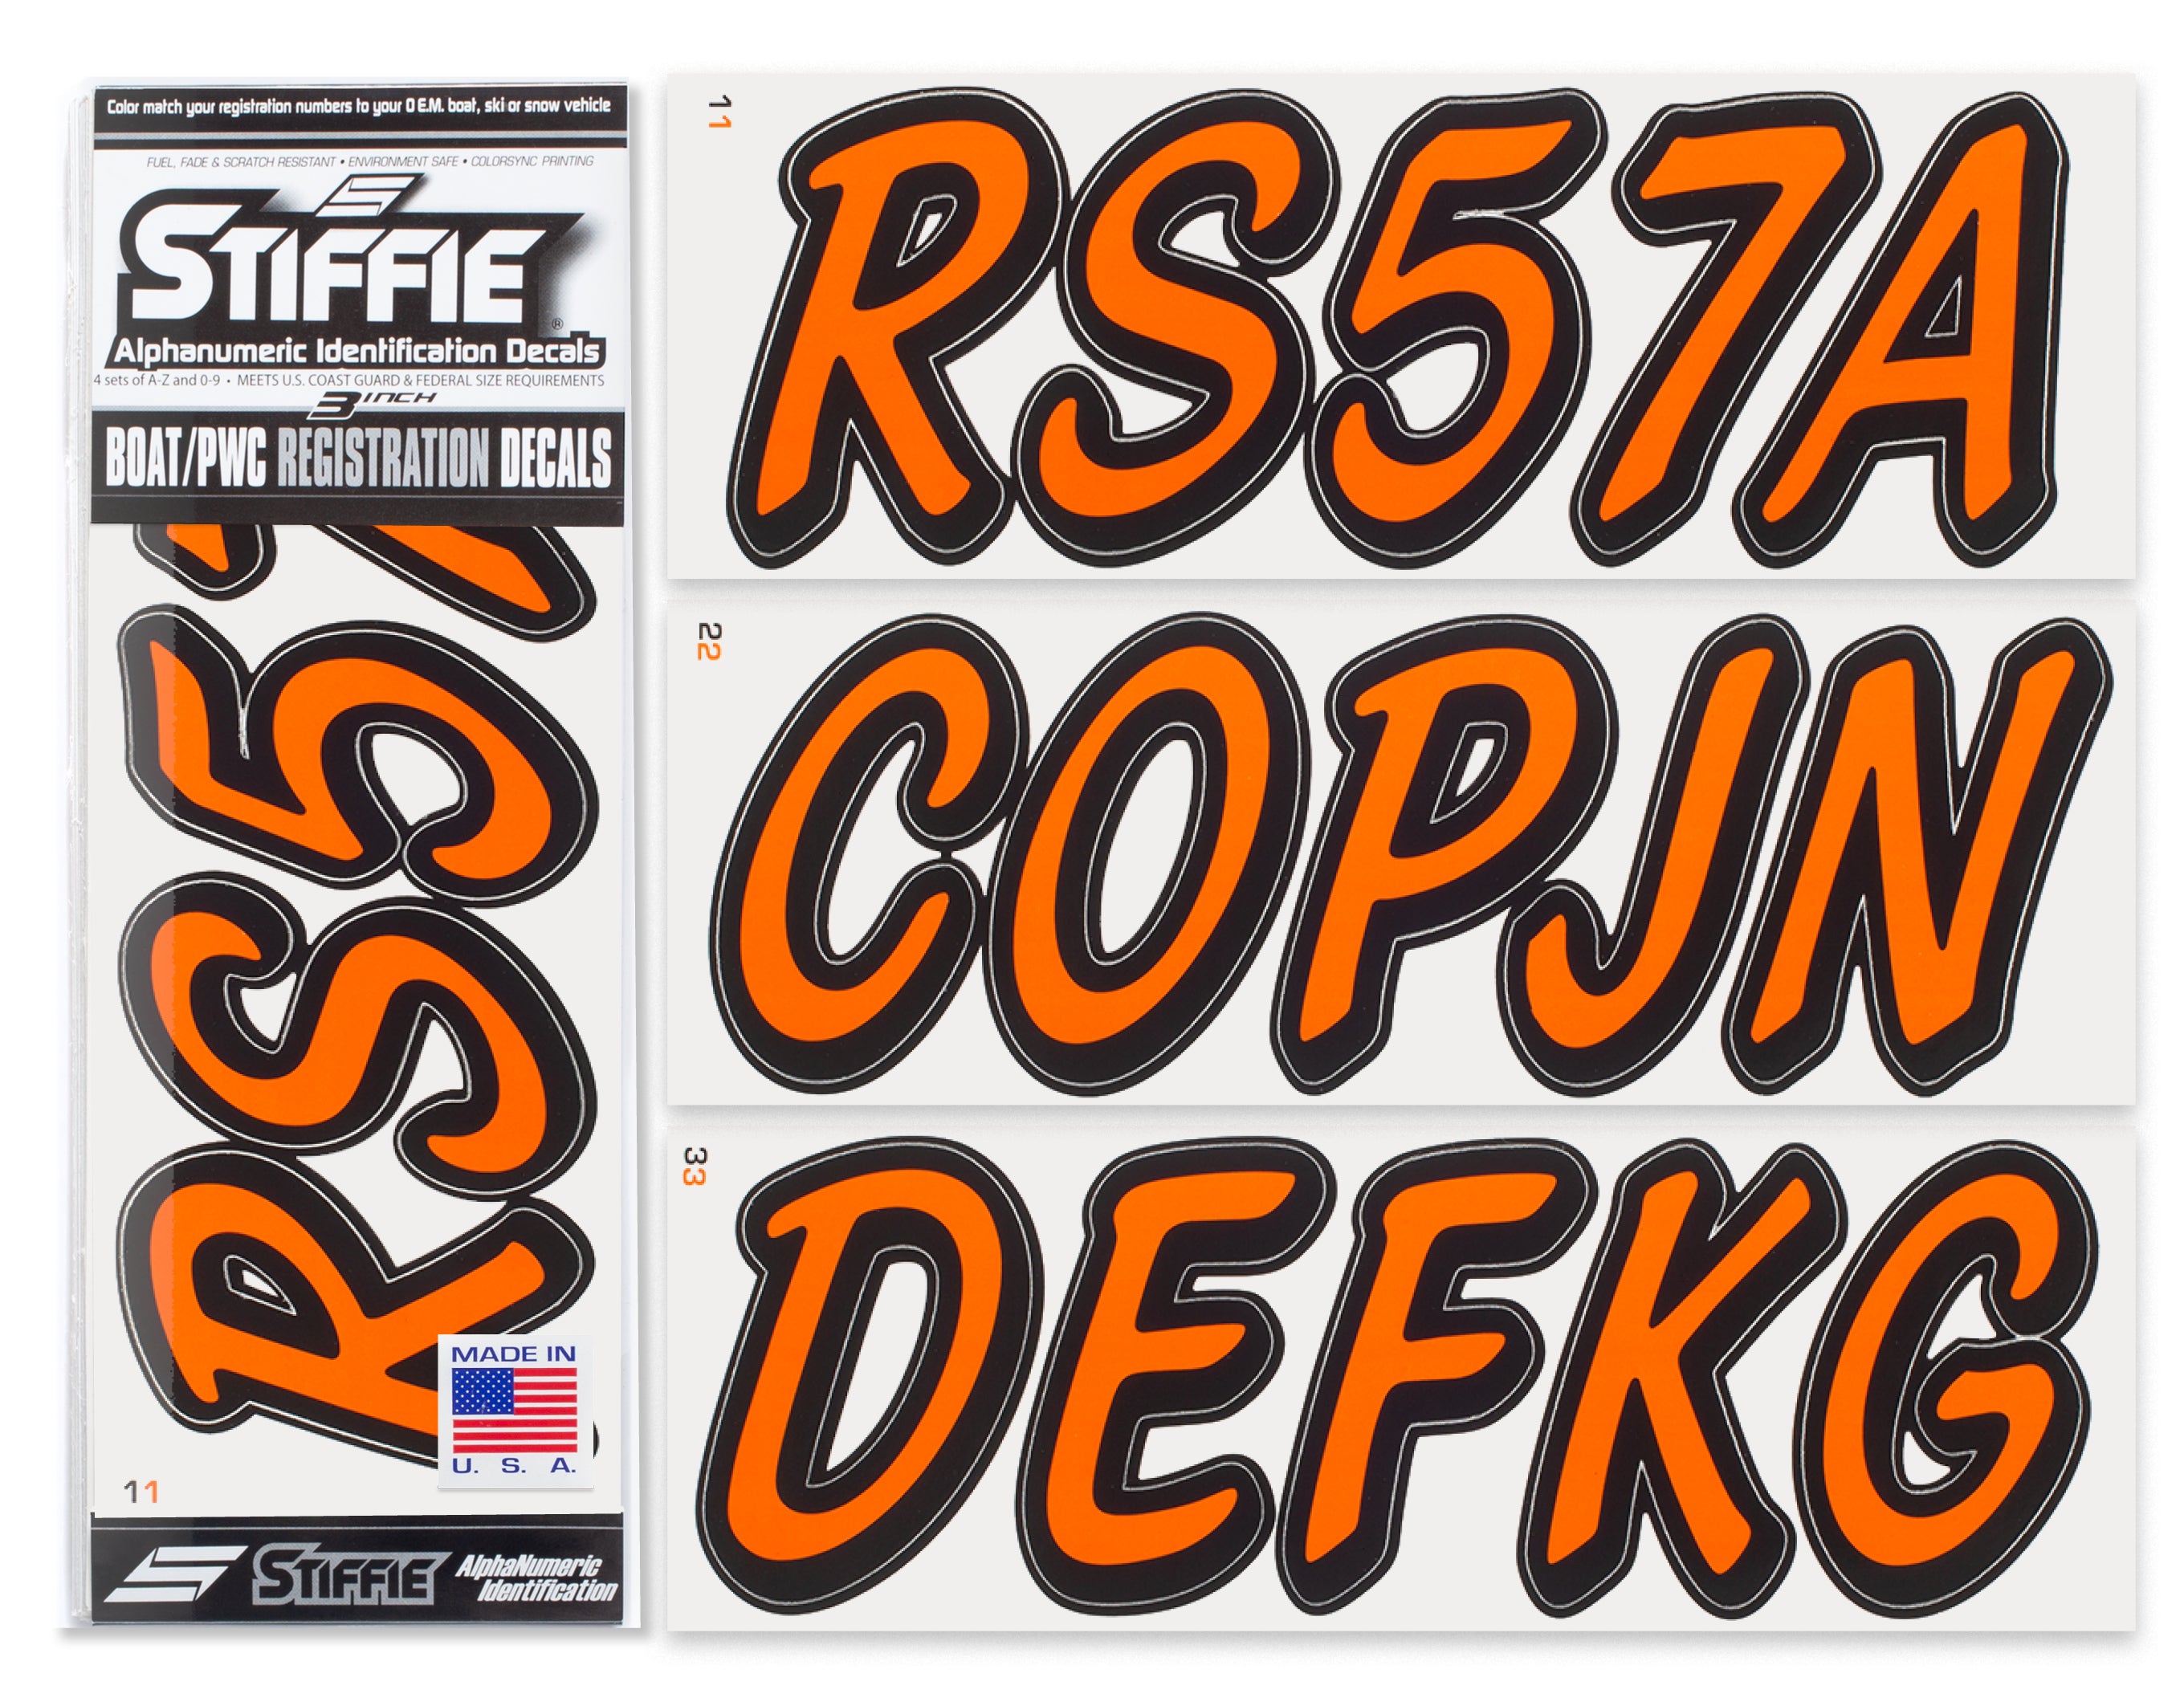 STIFFIE Whipline Solid Orange/Black 3" Alpha-Numeric Registration Identification Numbers Stickers Decals for Boats & Personal Watercraft